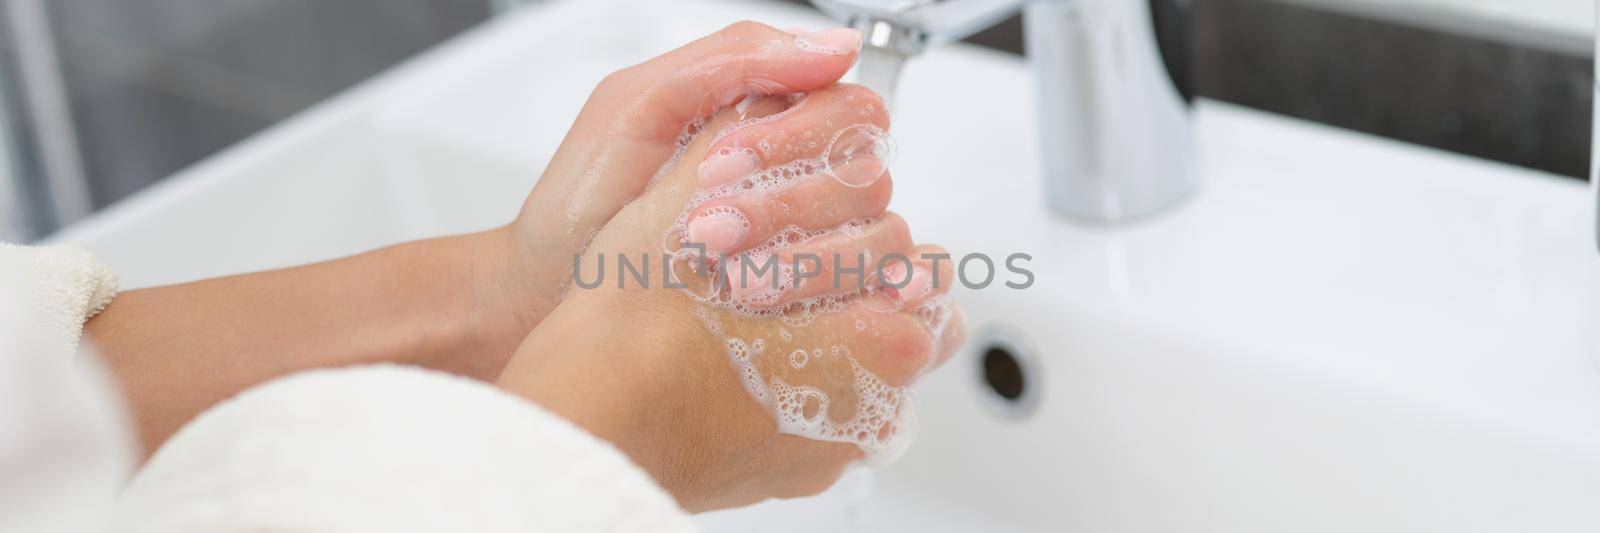 A woman in a dressing gown washes her hands with soap, close-up. Personal hygiene during a pandemic